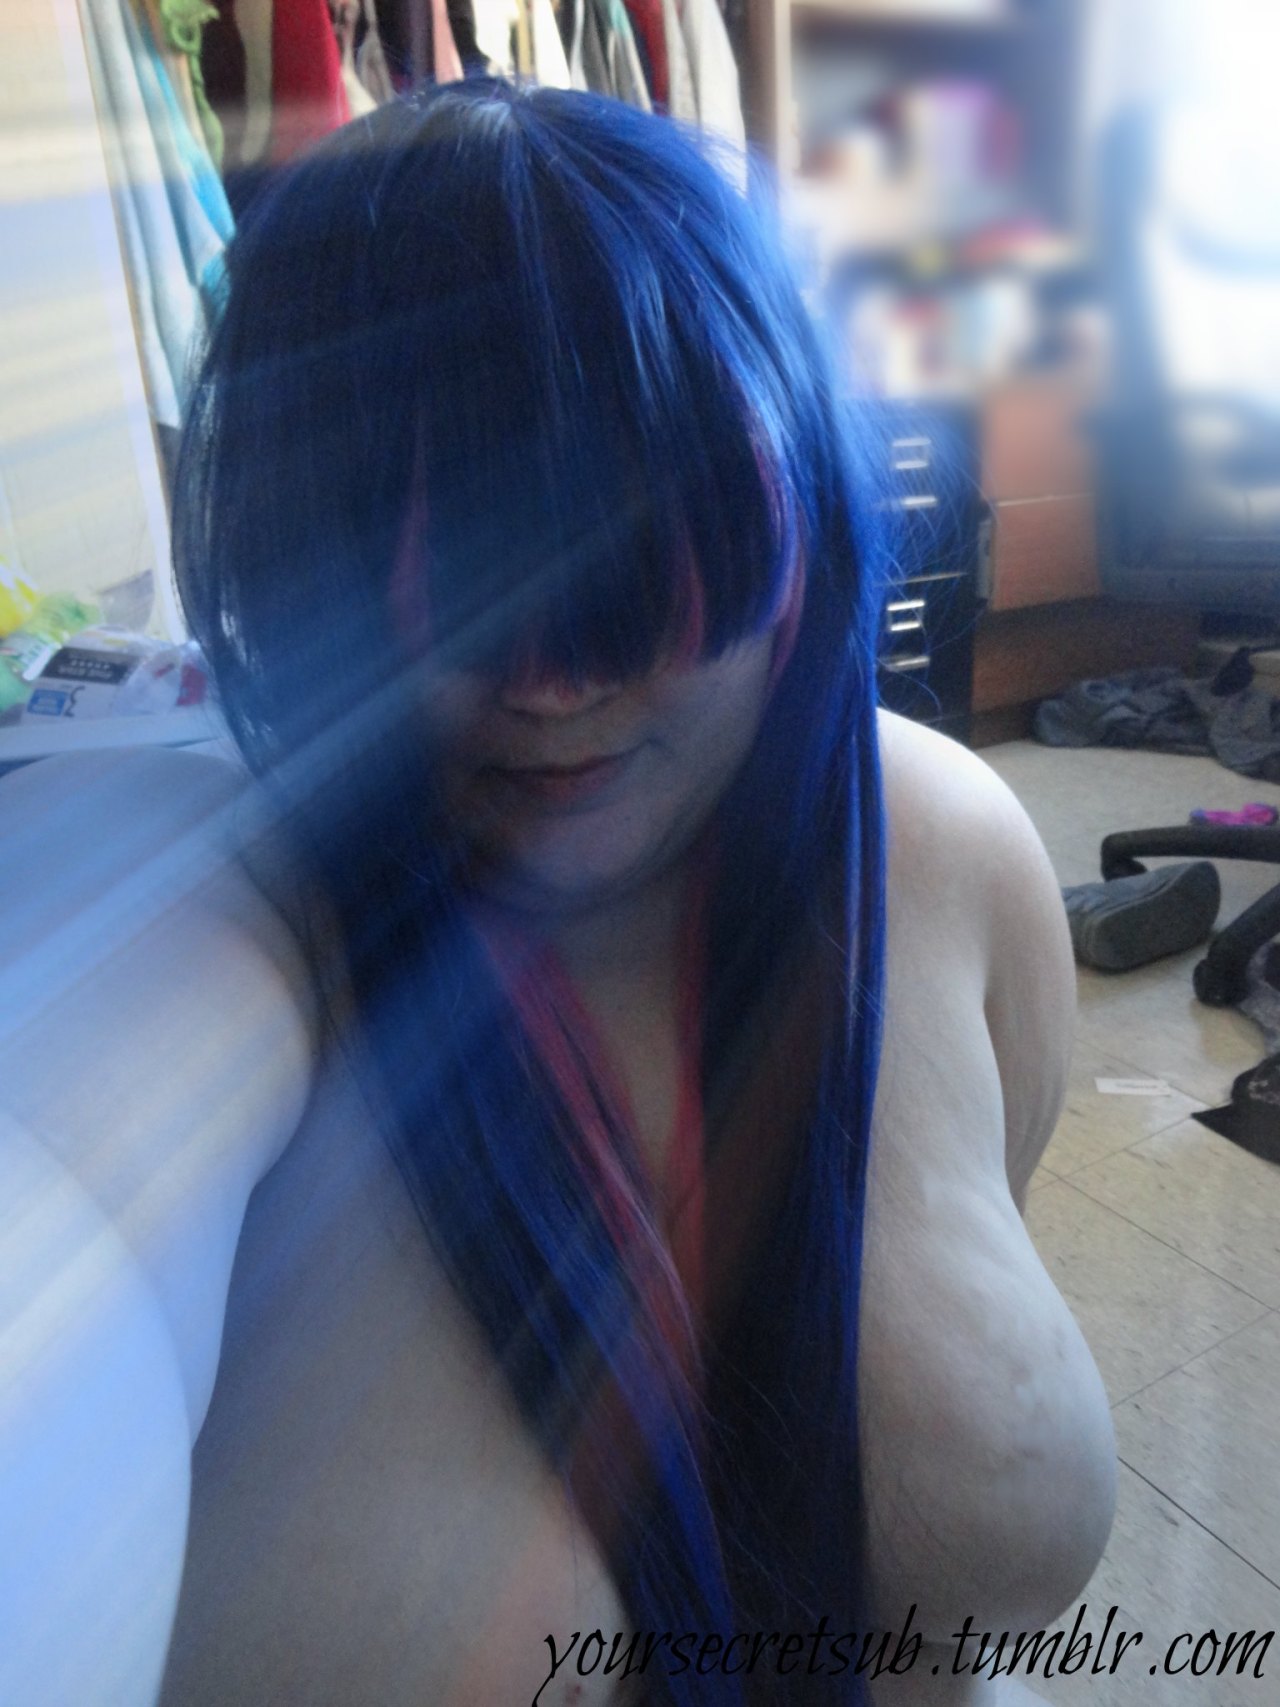 My new wig.  It was so exciting to have long hair! (though I was not prepared for